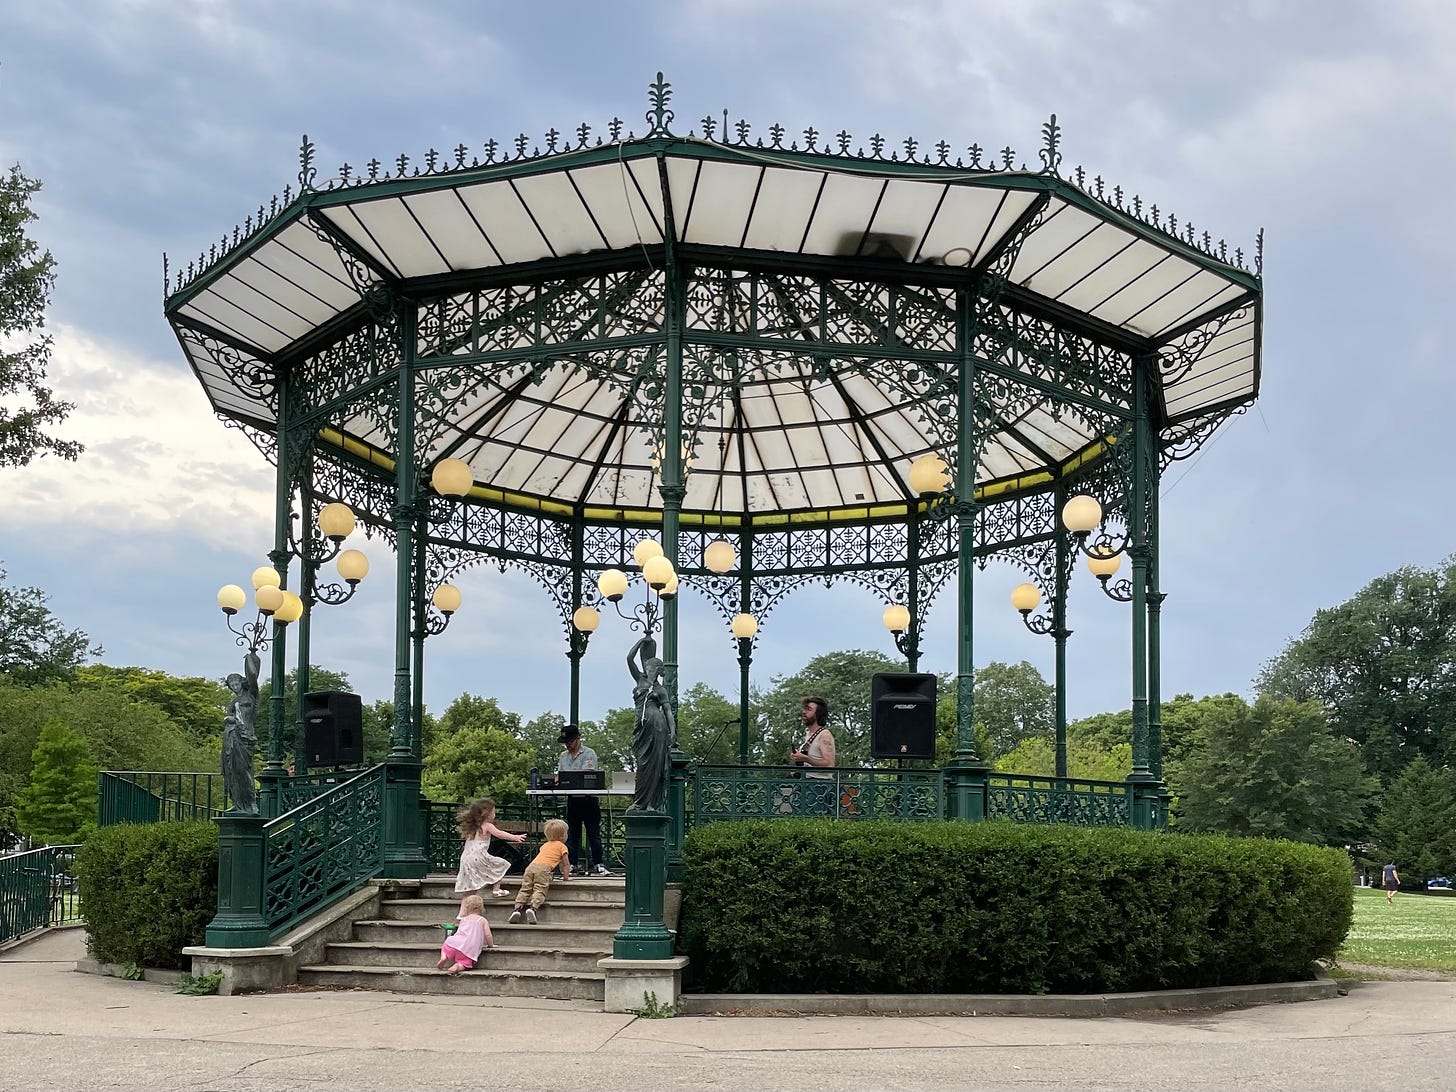 A green and white gazebo surrounded by hedges and trees. Under the gazebo are two musicians. There are three toddlers climbing the stairs of the gazebo.